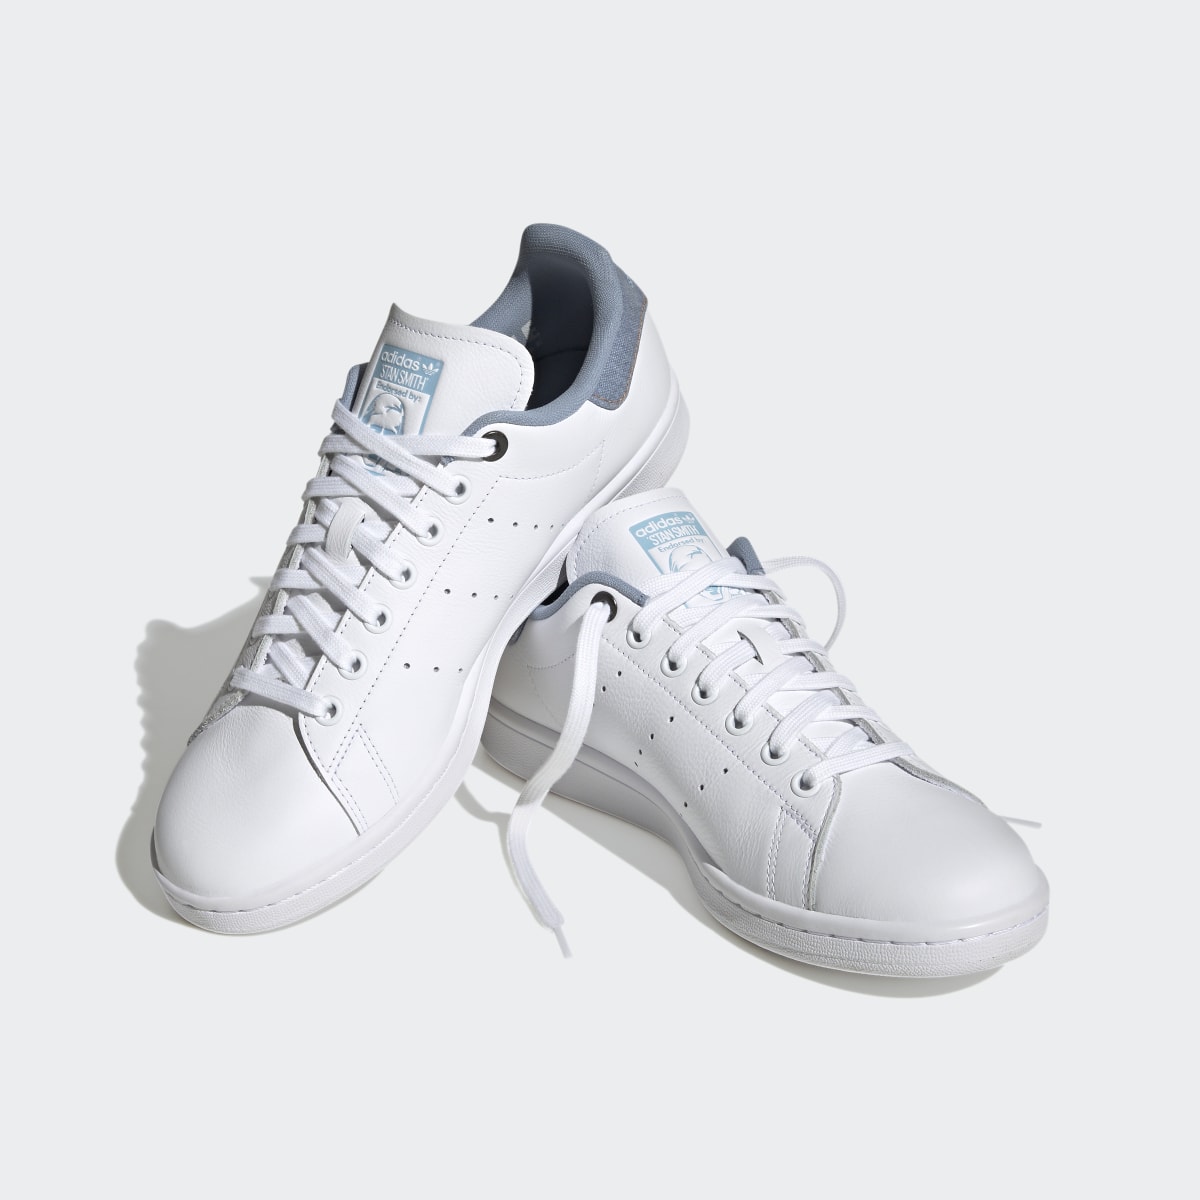 Adidas Stan Smith Shoes. 8